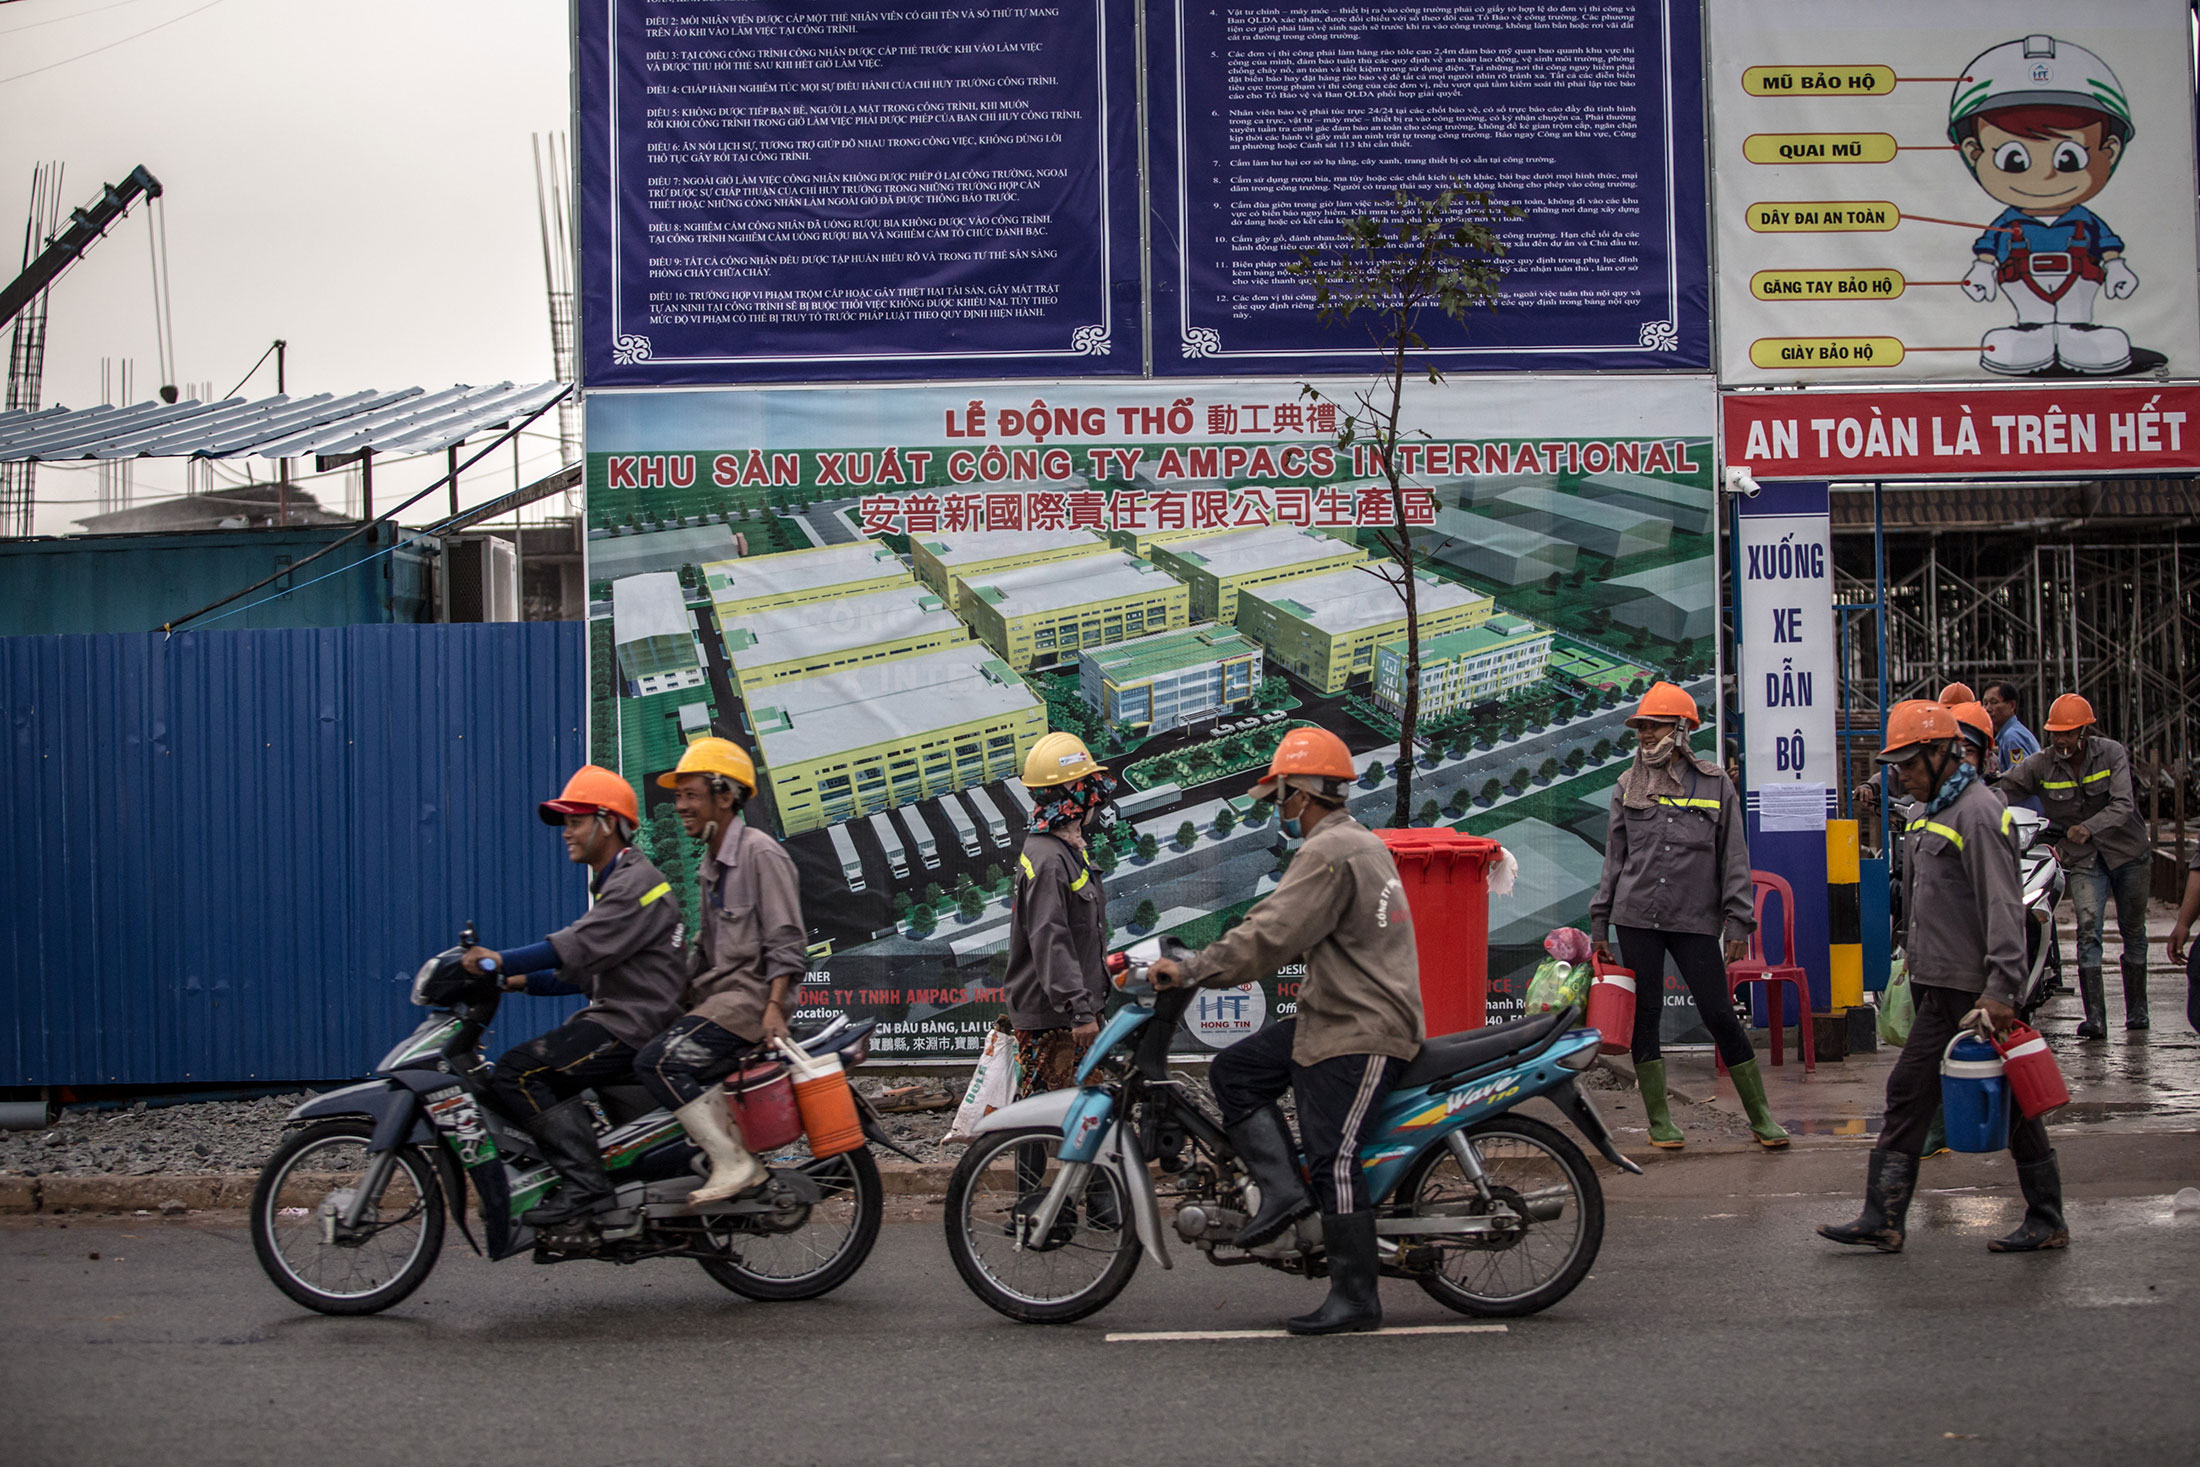 Bau Bang&nbsp;in Binh Duong province is one of several industrial parks in Vietnam reporting a surge of interest from foreign manufacturers.